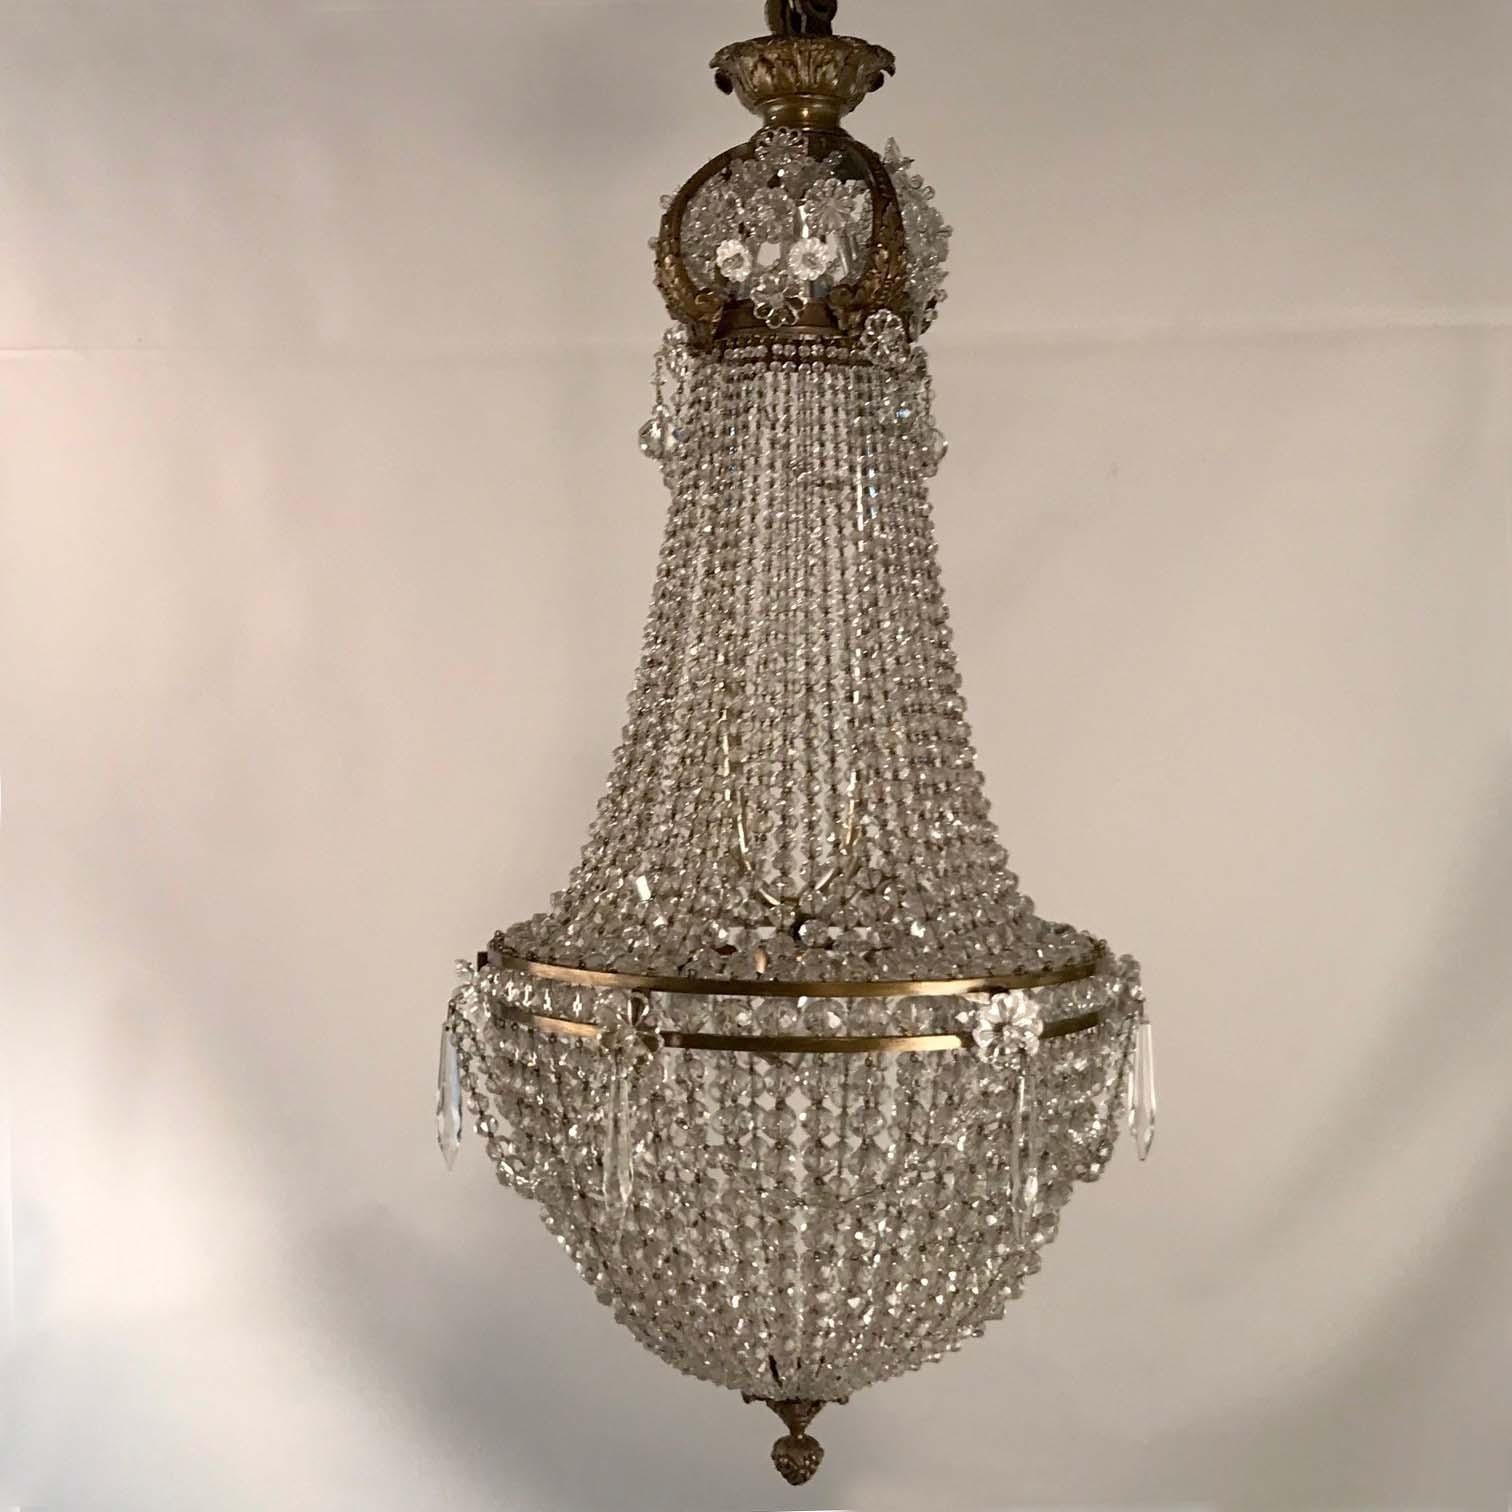 The hemispherical bag is formed with cut beads of graduated size. Descending from the bonnet-shaped crown, swags of graduated cut beads complete the glittering effect Often this type of chandelier tends to be large and heavy .This is an